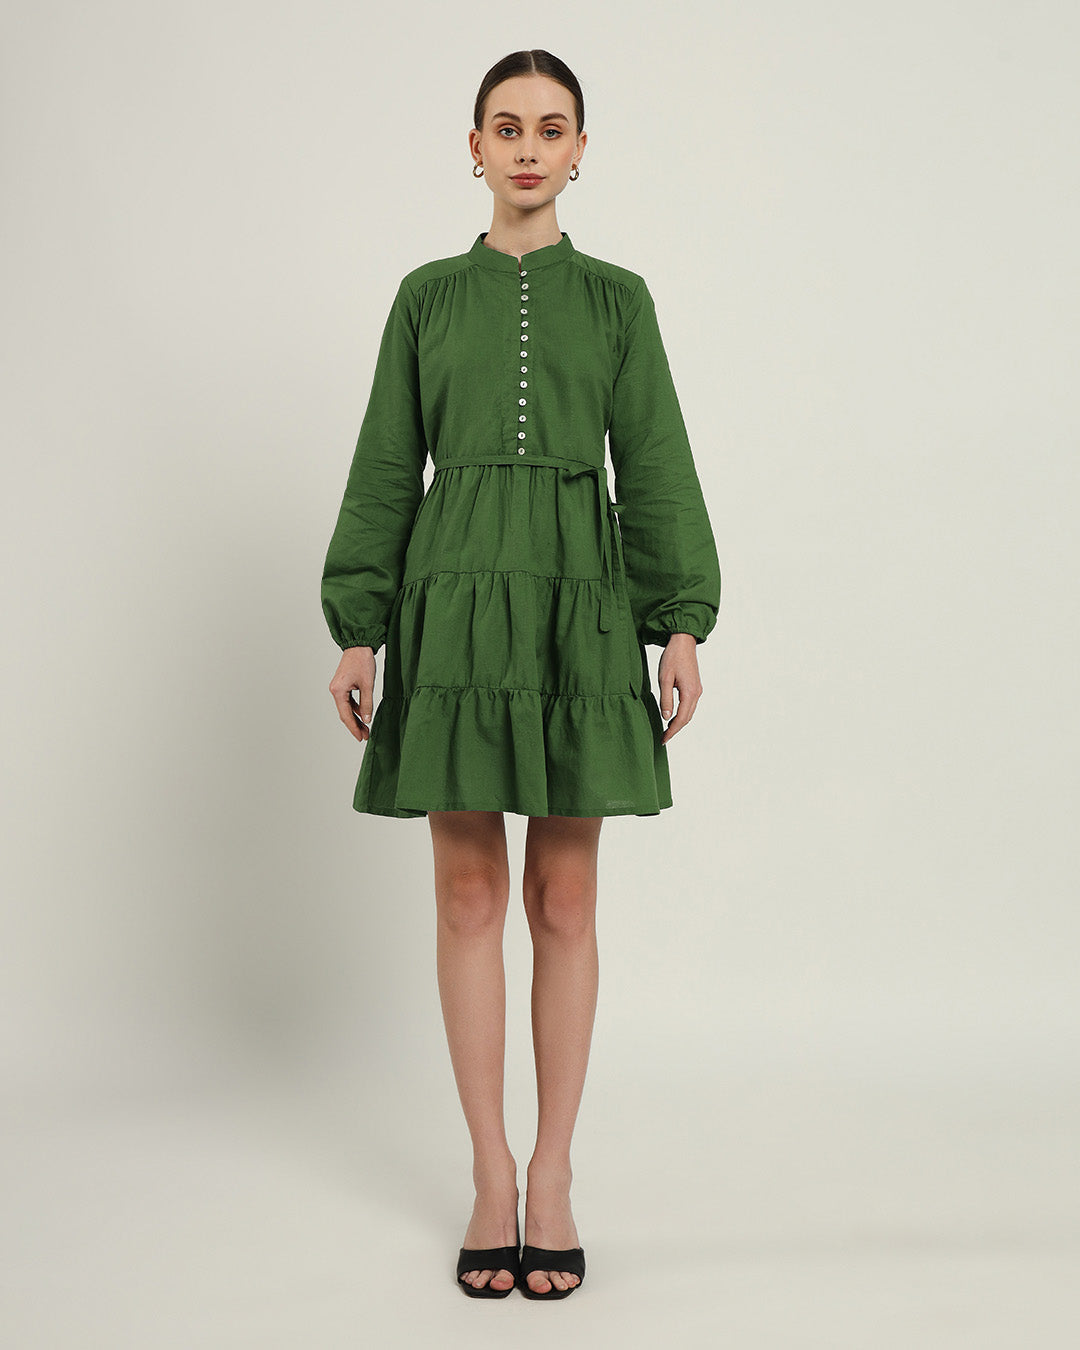 The Ely Emerald Dress